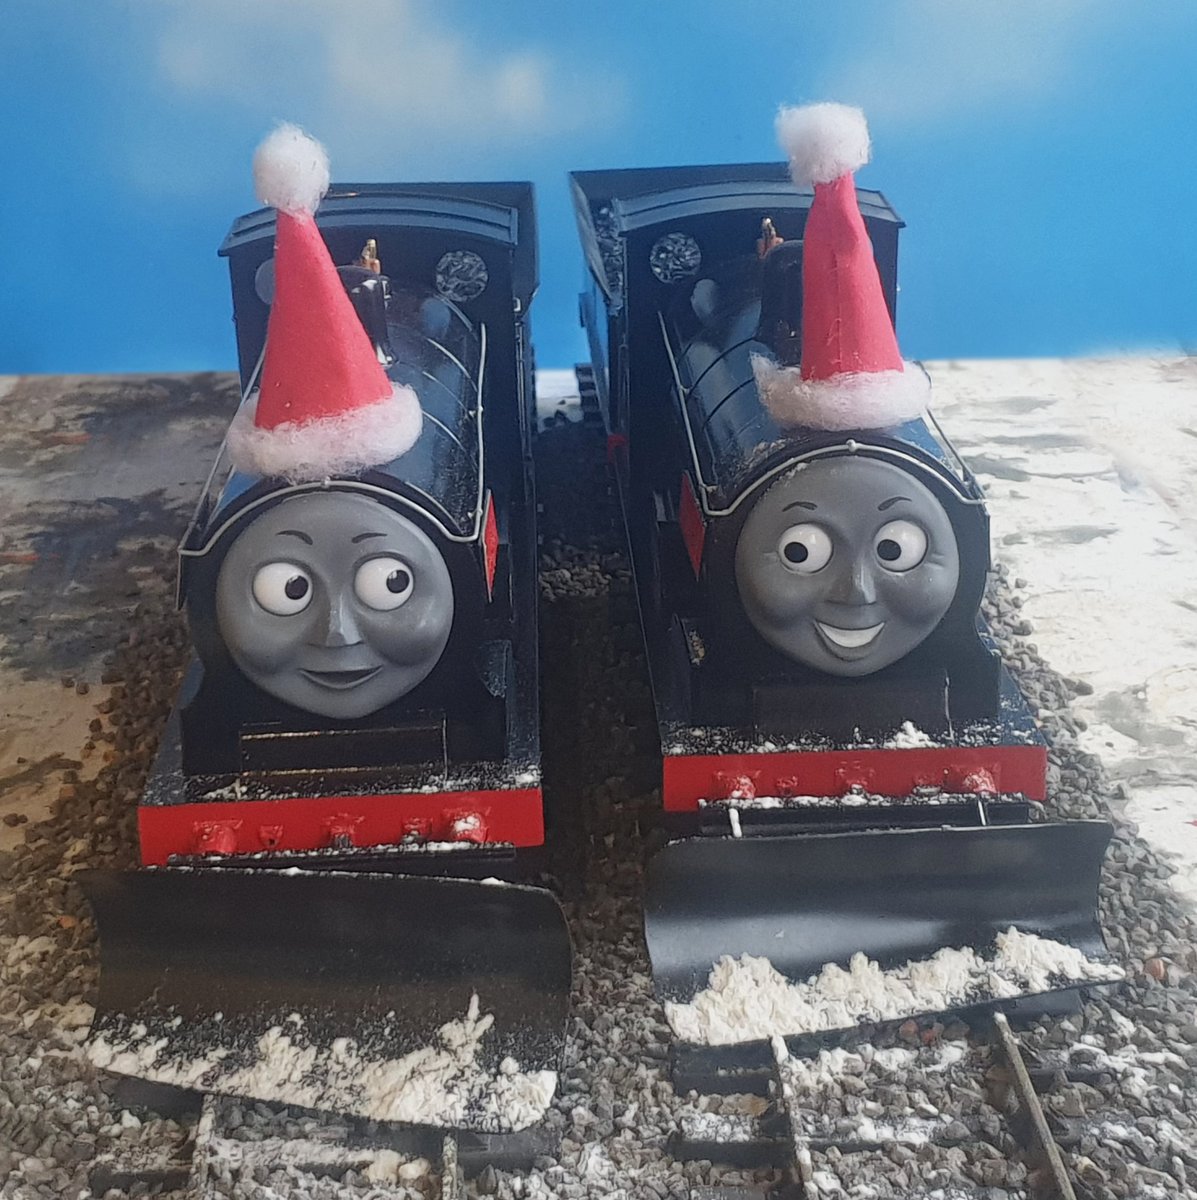 Merry Christmas from me and the engines!